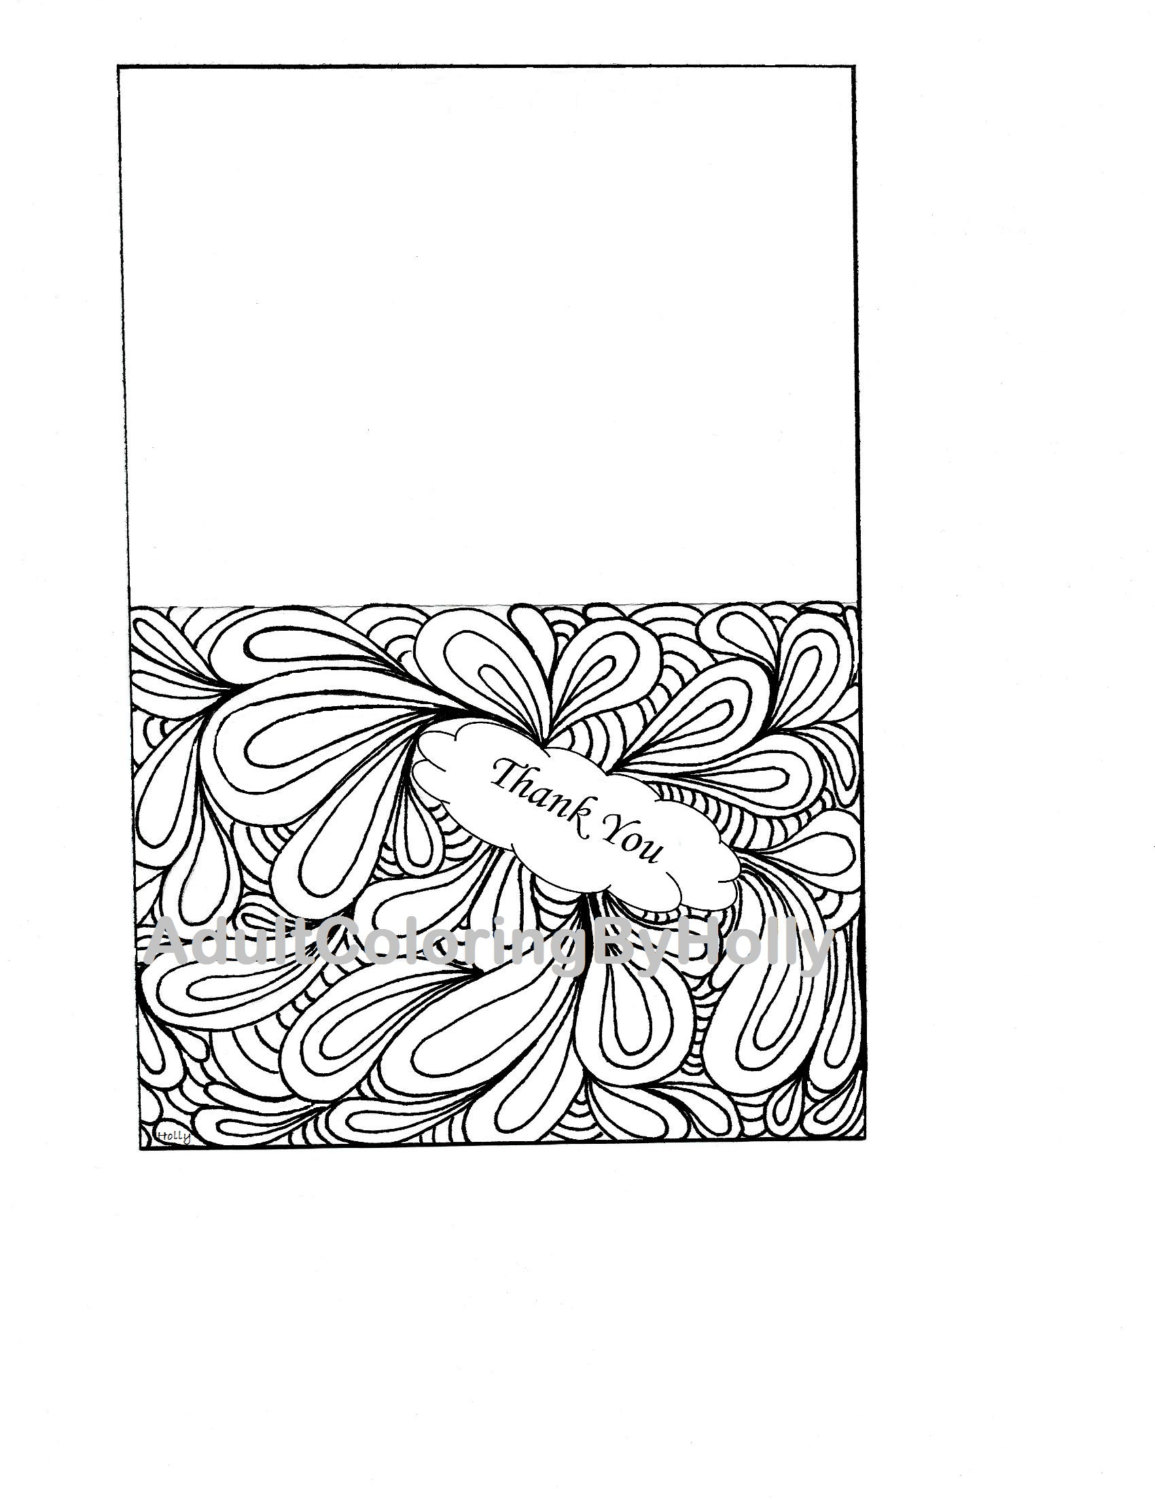 Free Printable Thank You Coloring Pages at GetDrawings ...